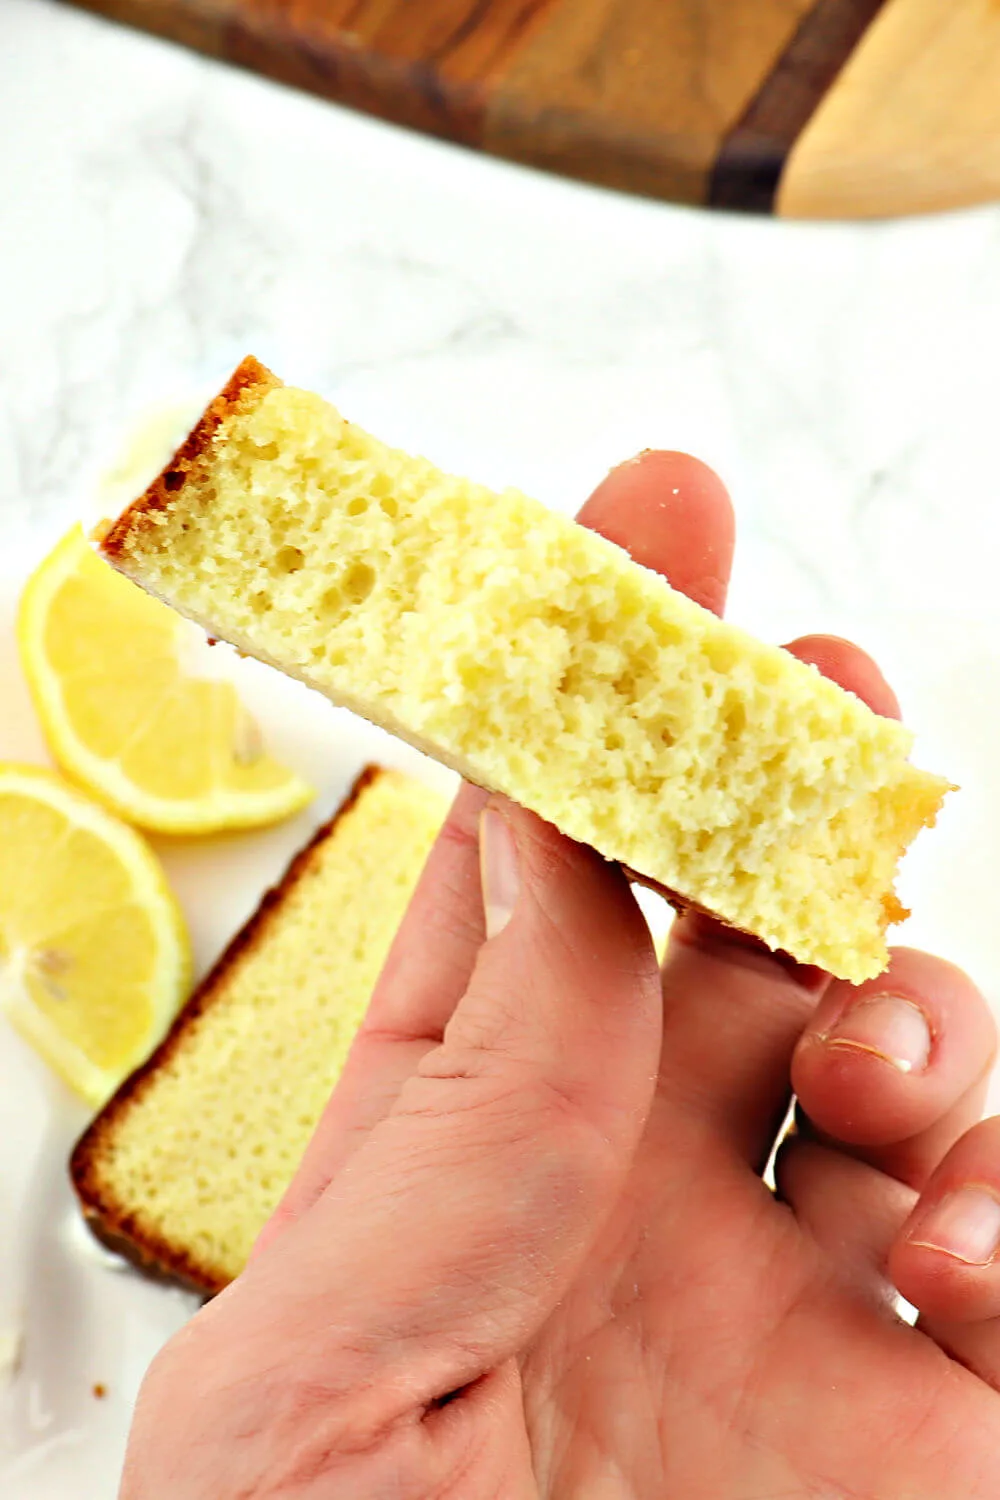 This flavorful keto lemon pound cake recipe is the perfect low carb recipe for a gluten-free high tea or a protein packed breakfast. Easy and tangy, have a slice with your coffee or for a fabulous keto dessert. #ketopoundcake #ketobreakfast #ketodessertrecipes #lowcarbdesserts